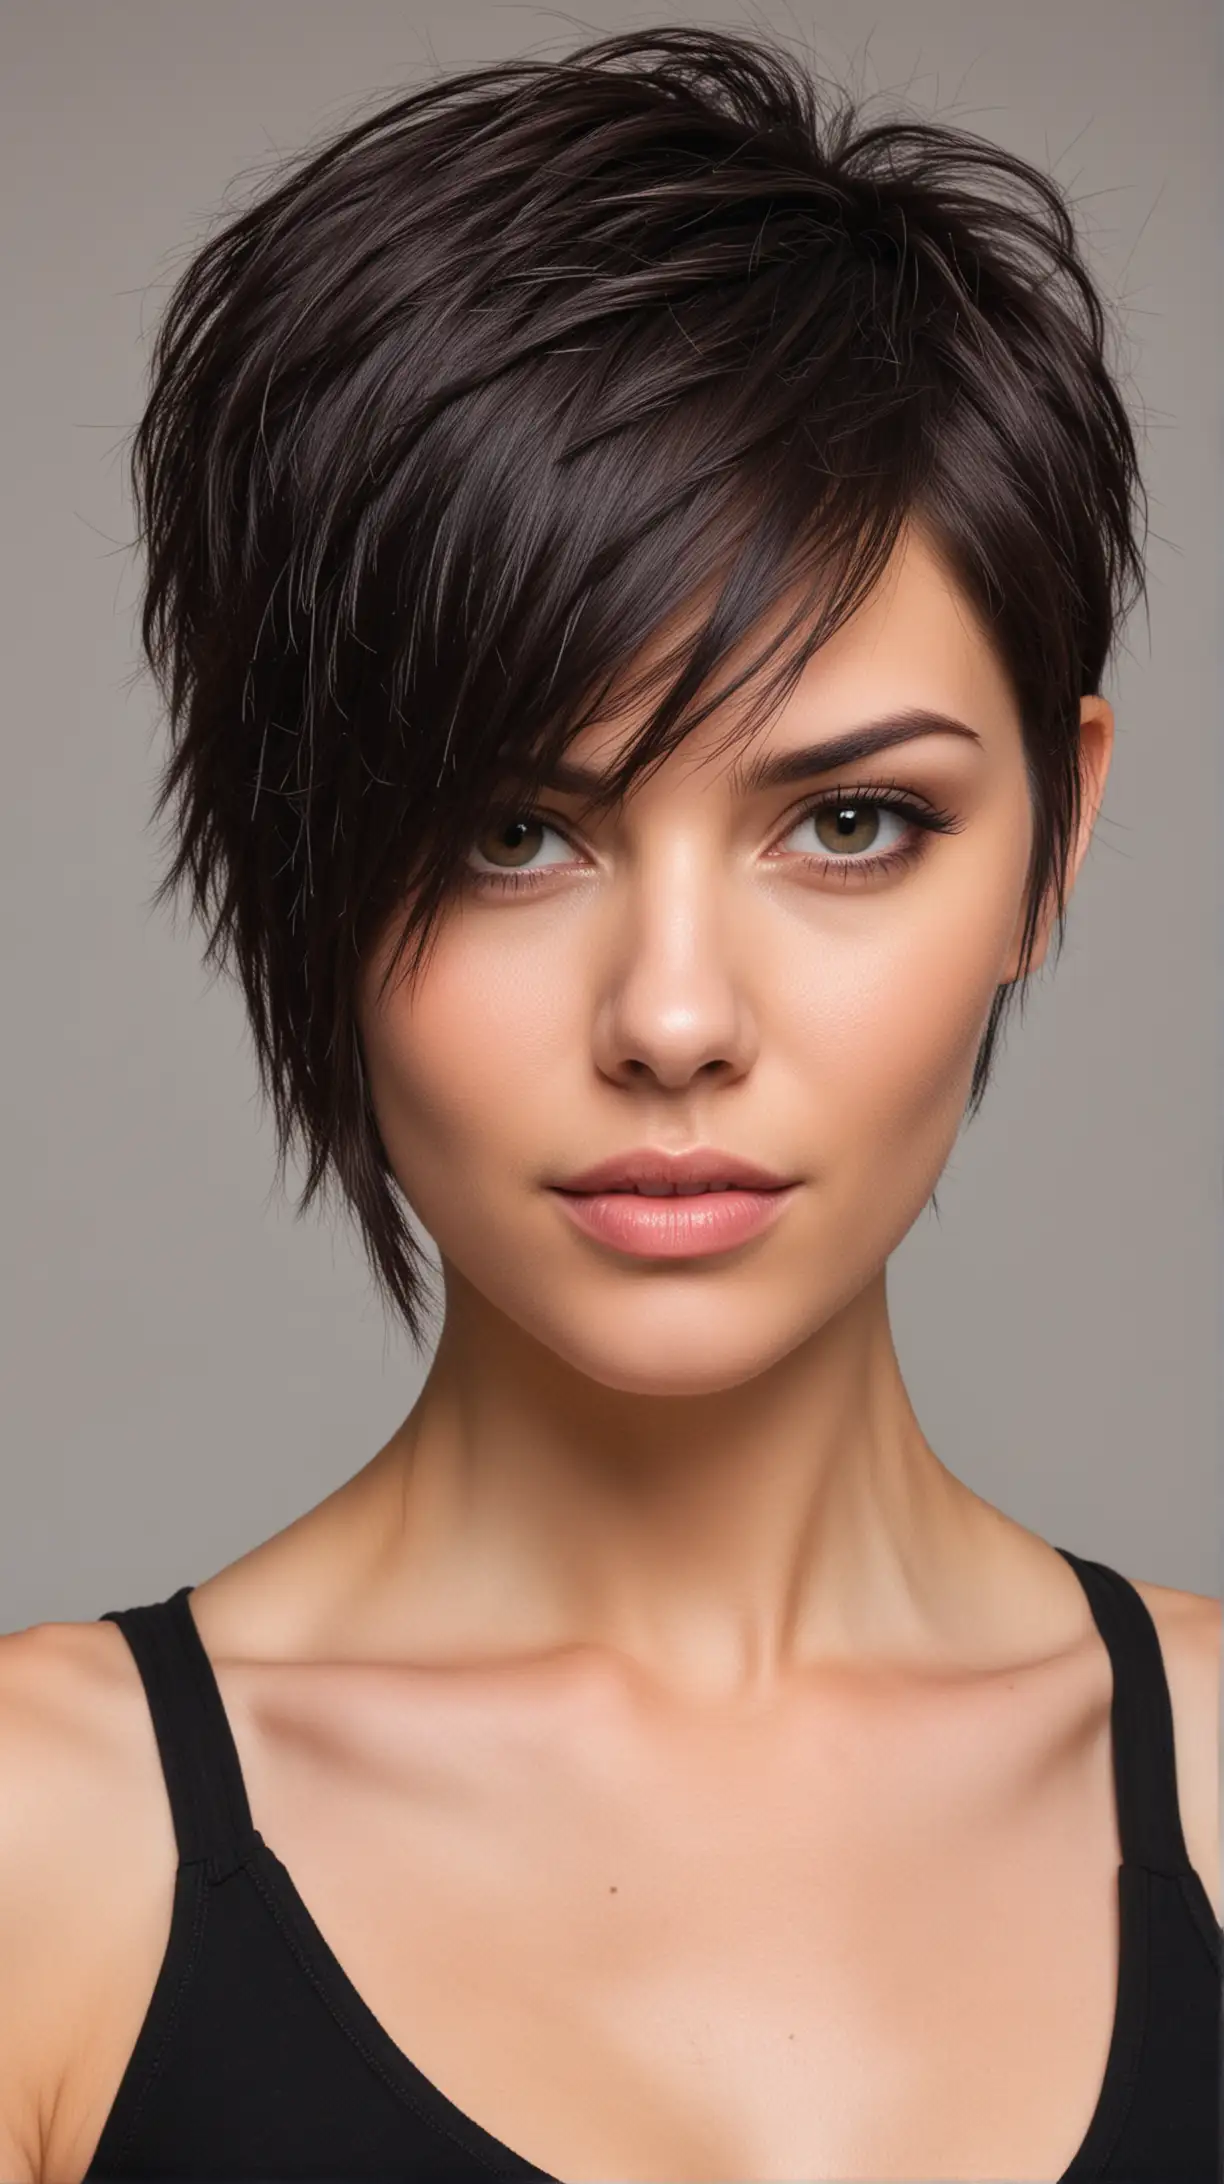 Edgy Asymmetrical Cut Hairstyle on a Confident 30YearOld Woman